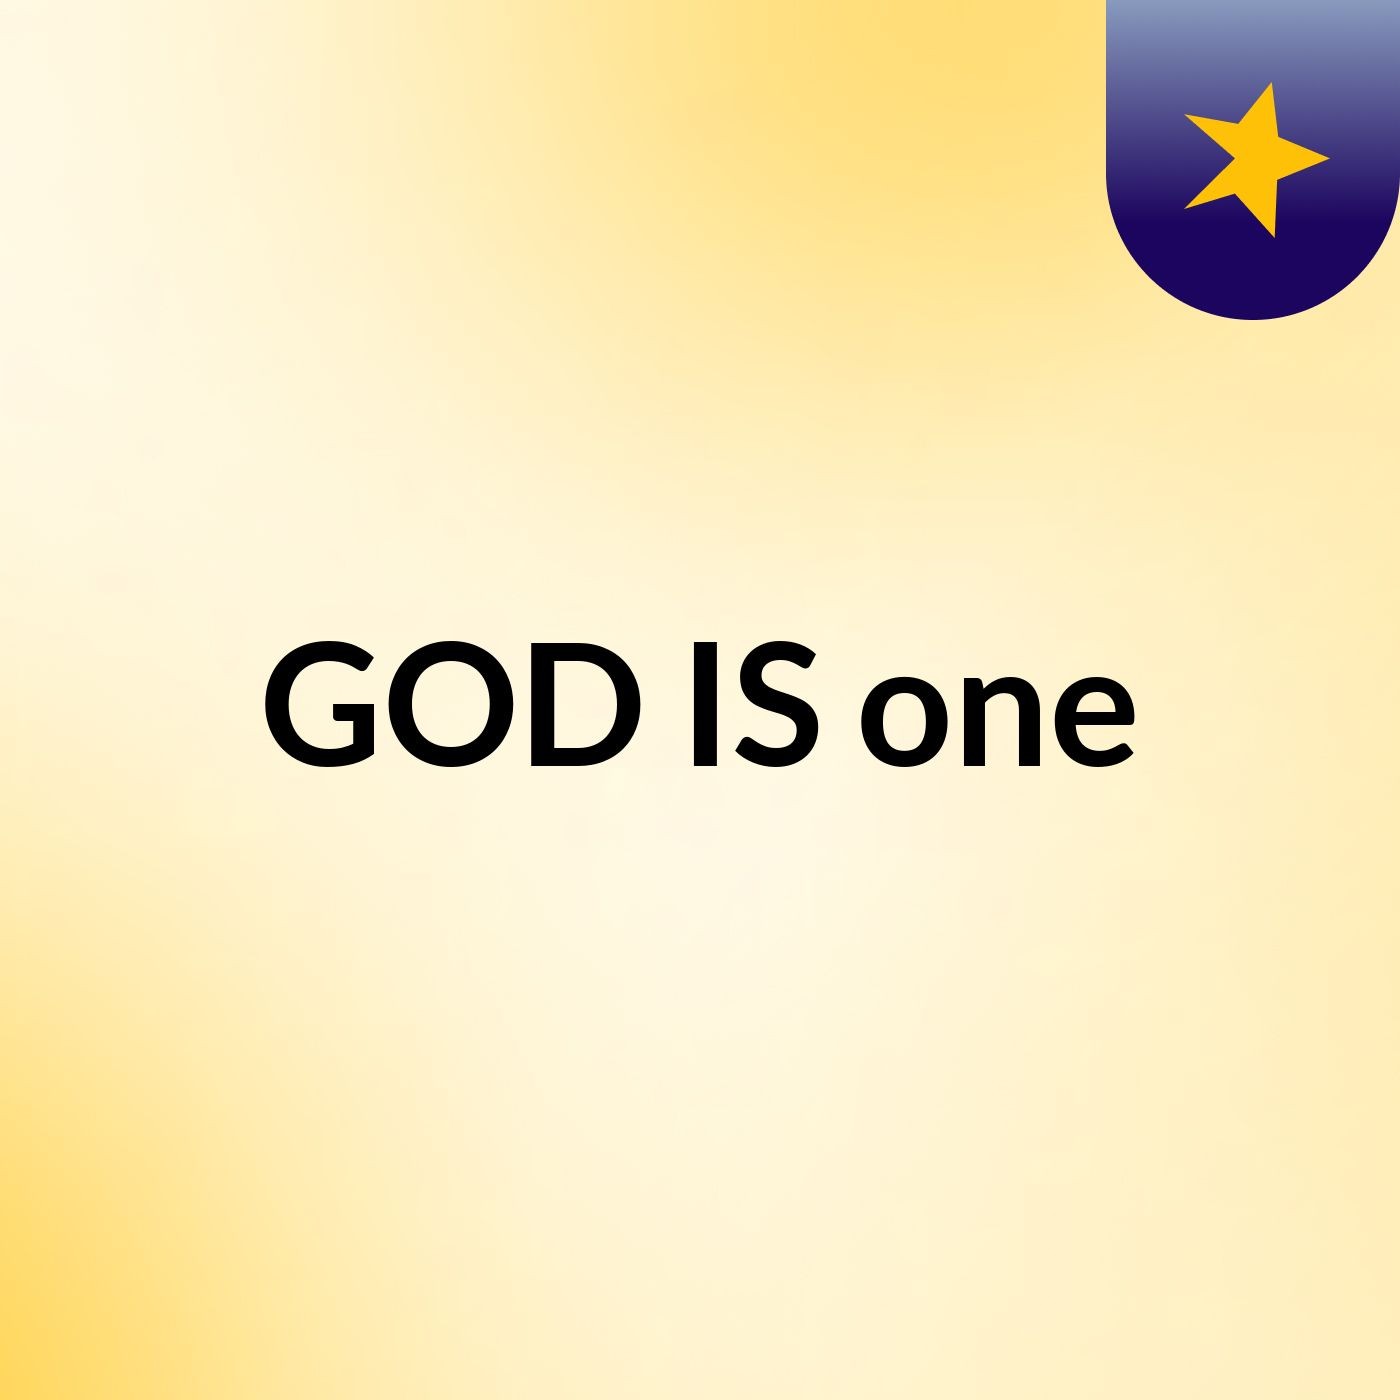 GOD IS one